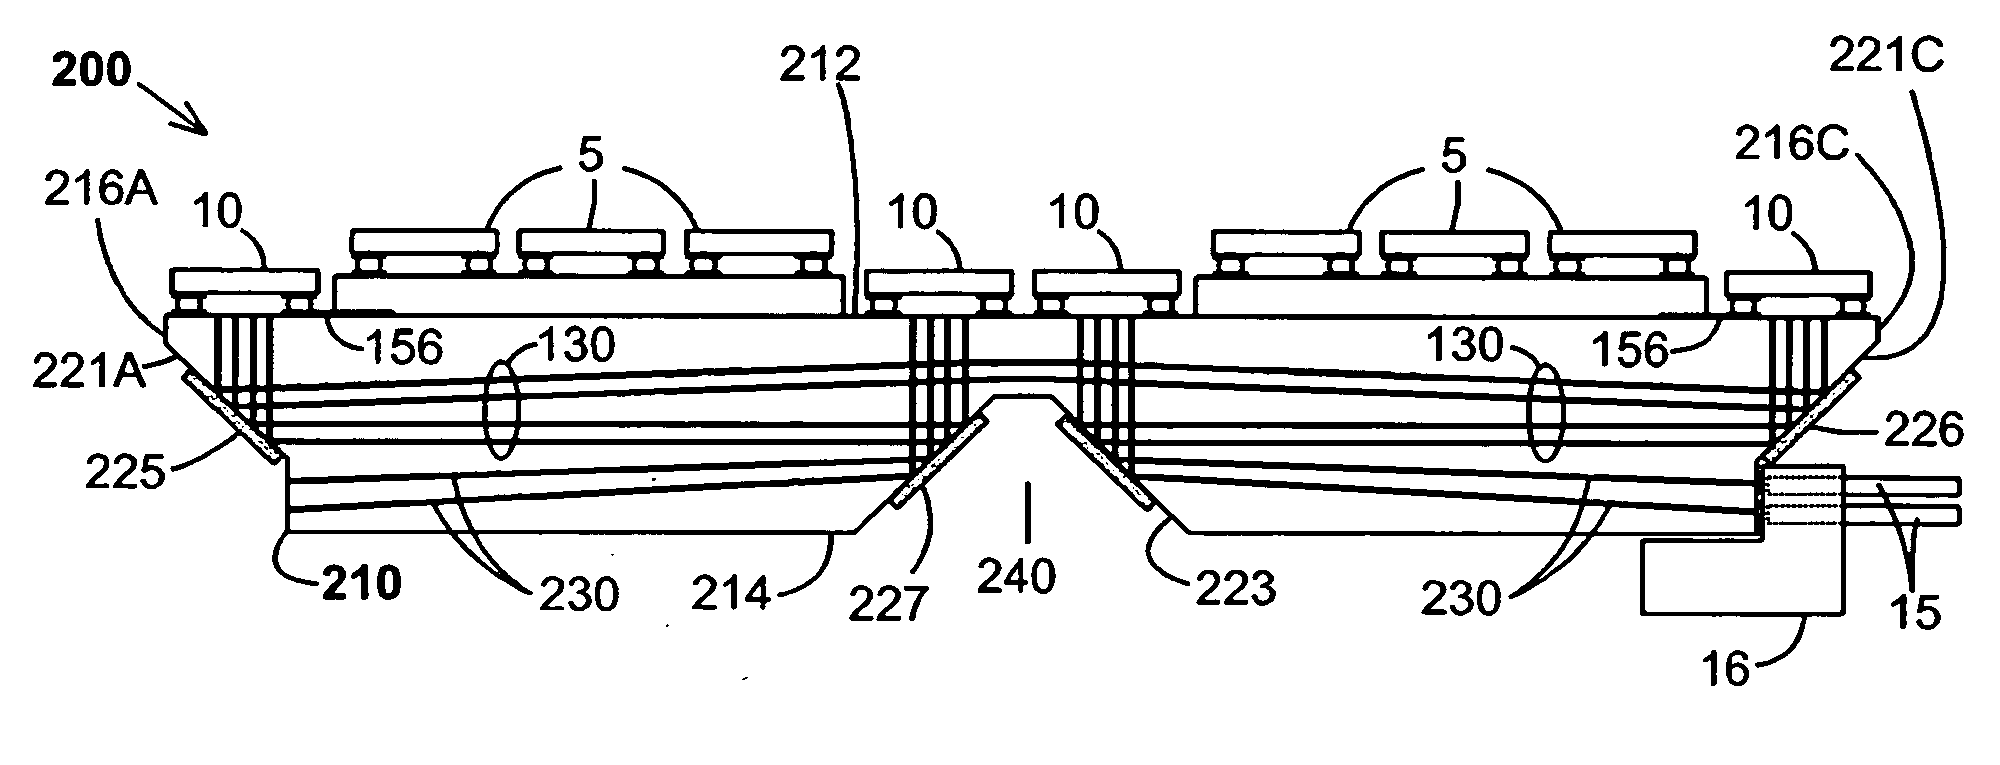 Optical-routing boards for opto-electrical systems and methods and apparatuses for manufacturing the same